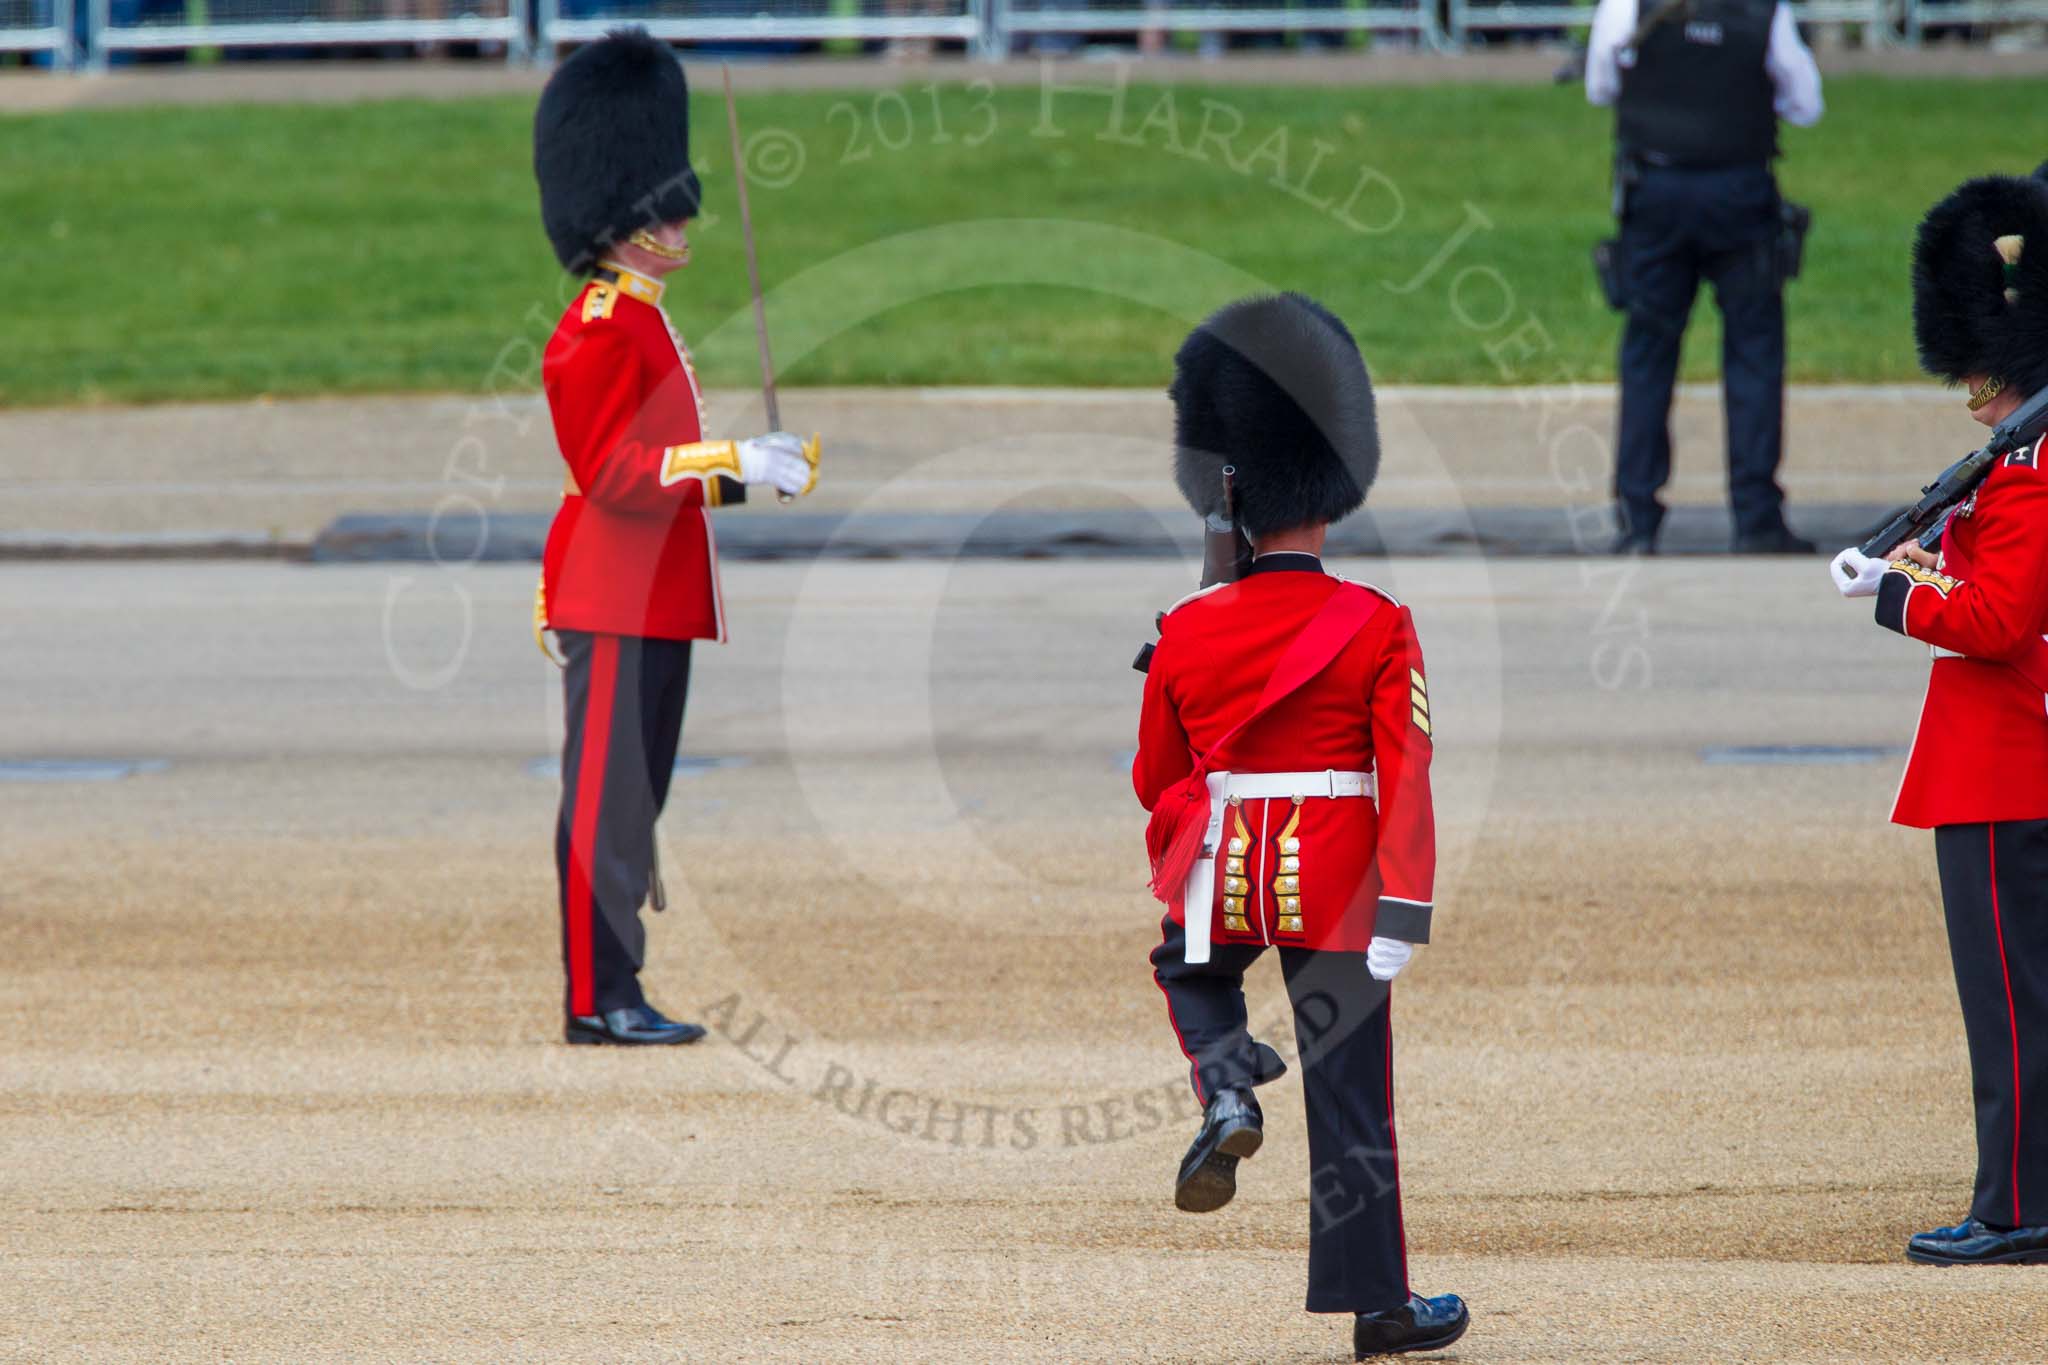 The Colonel's Review 2013.
Horse Guards Parade, Westminster,
London SW1,

United Kingdom,
on 08 June 2013 at 10:33, image #145